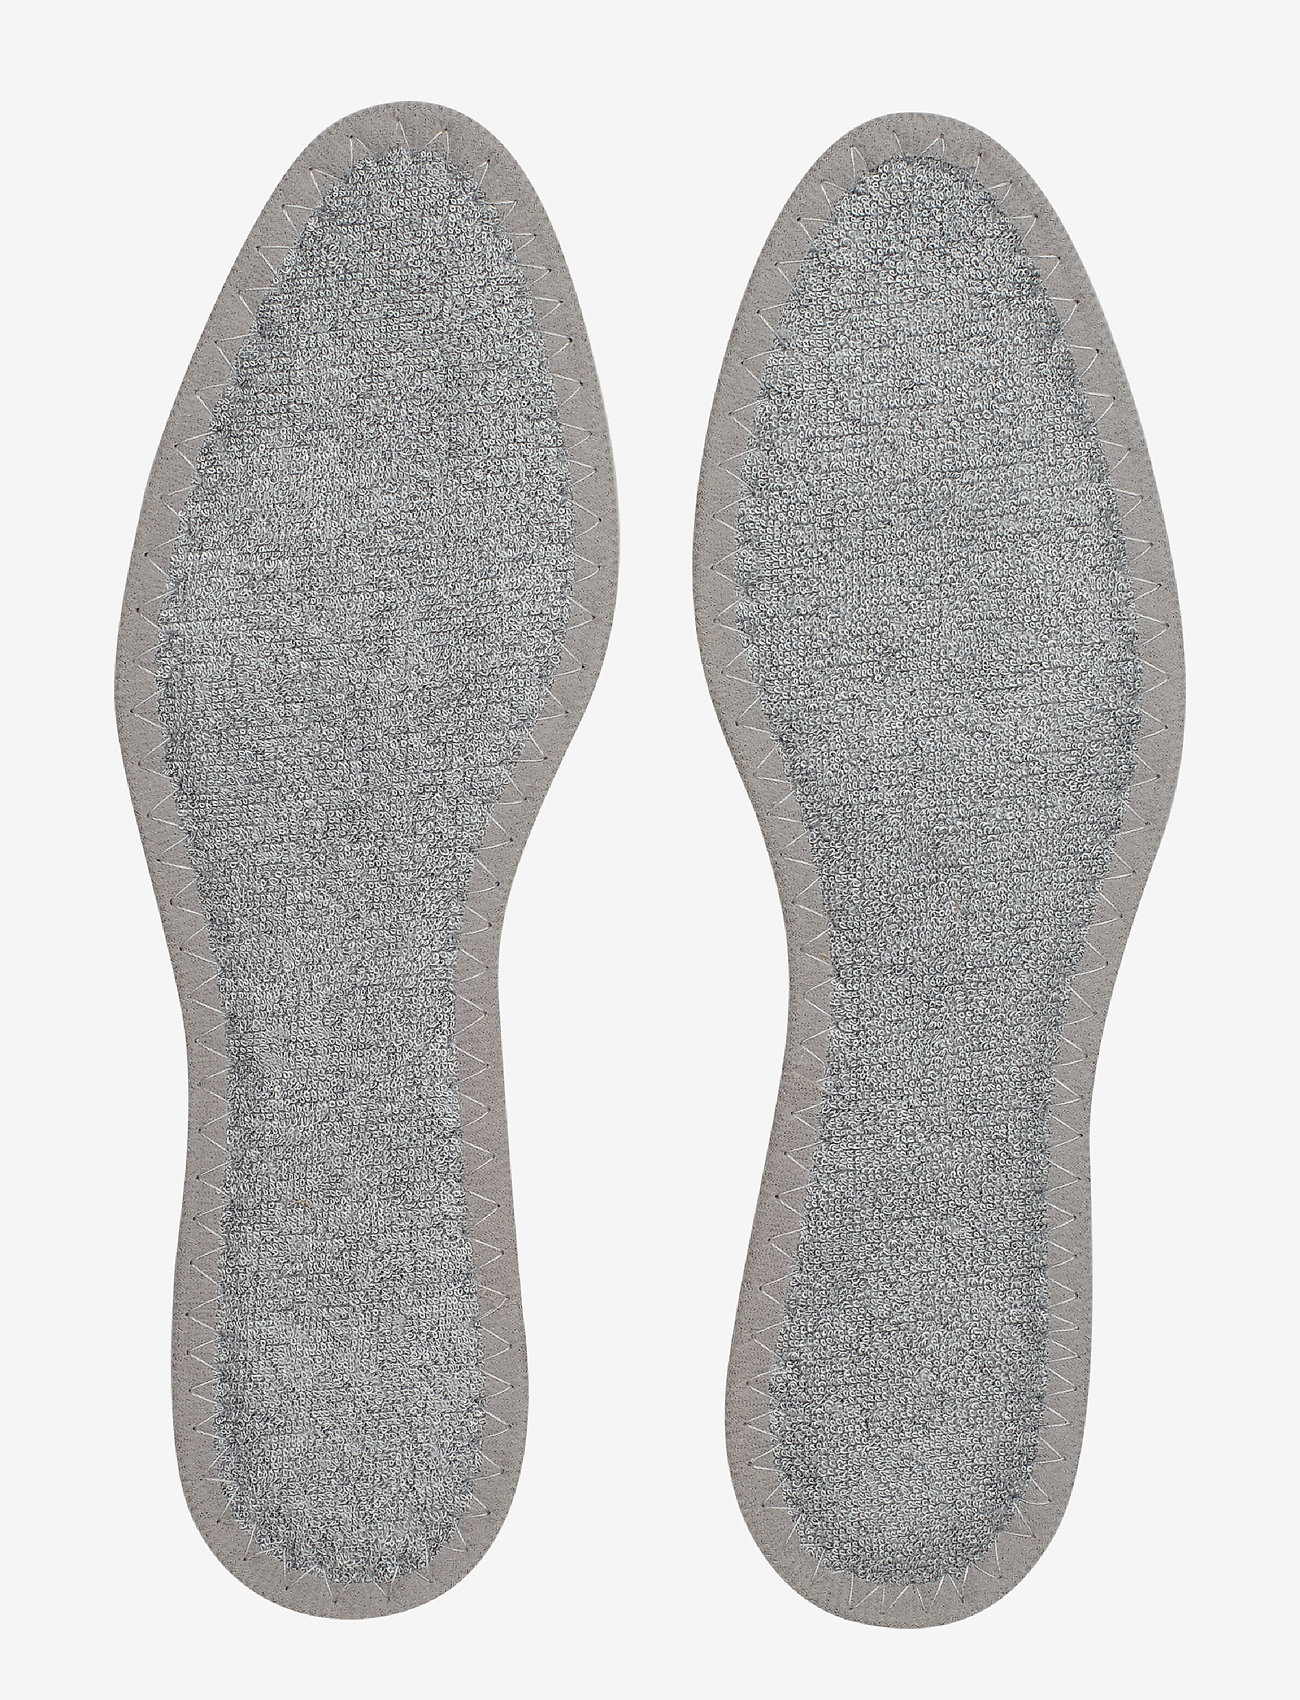 Springyard - Summer Insoles Therapy - lowest prices - grey - 0